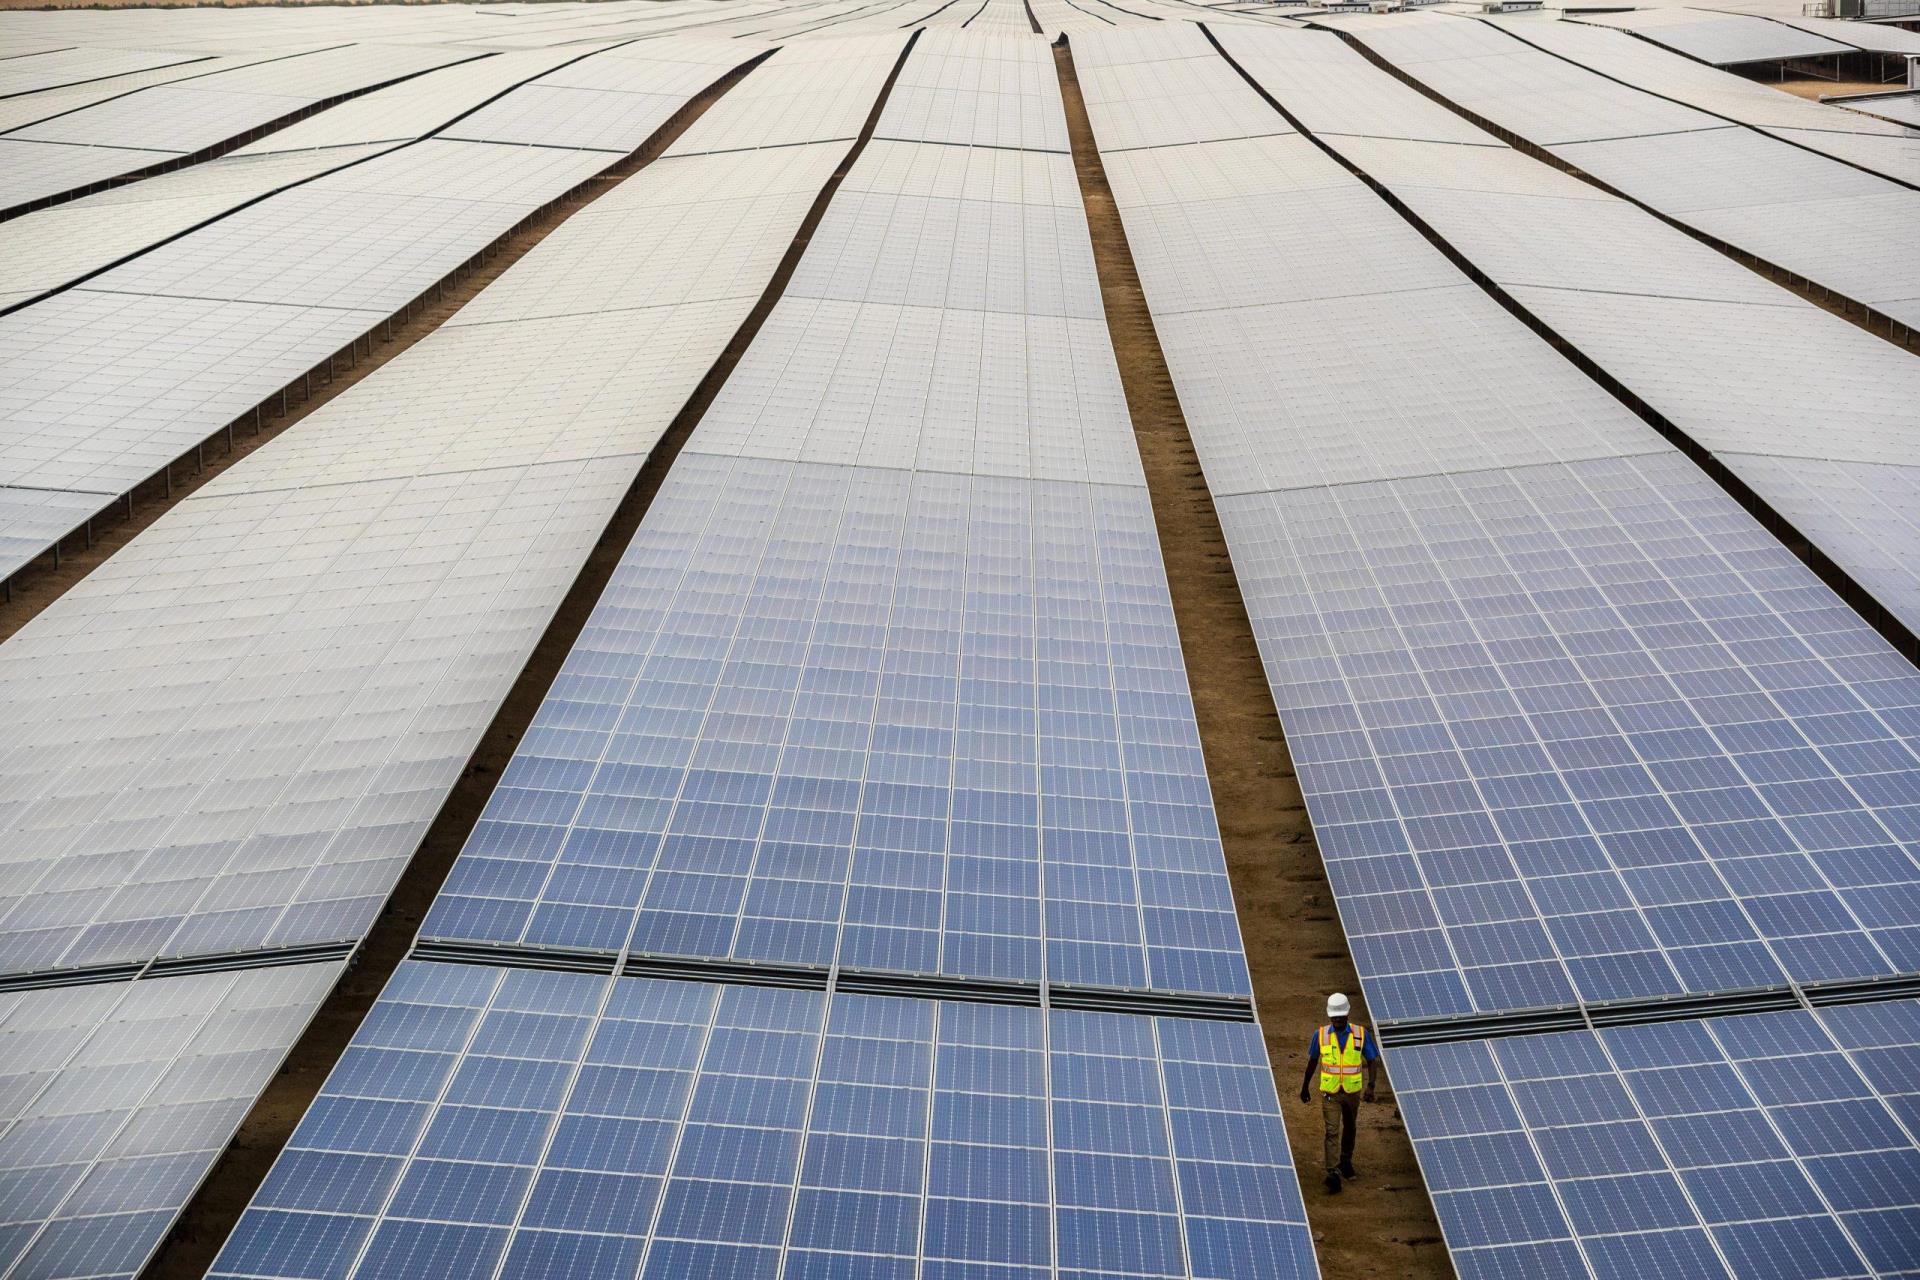 Solar panels with a worker for scale